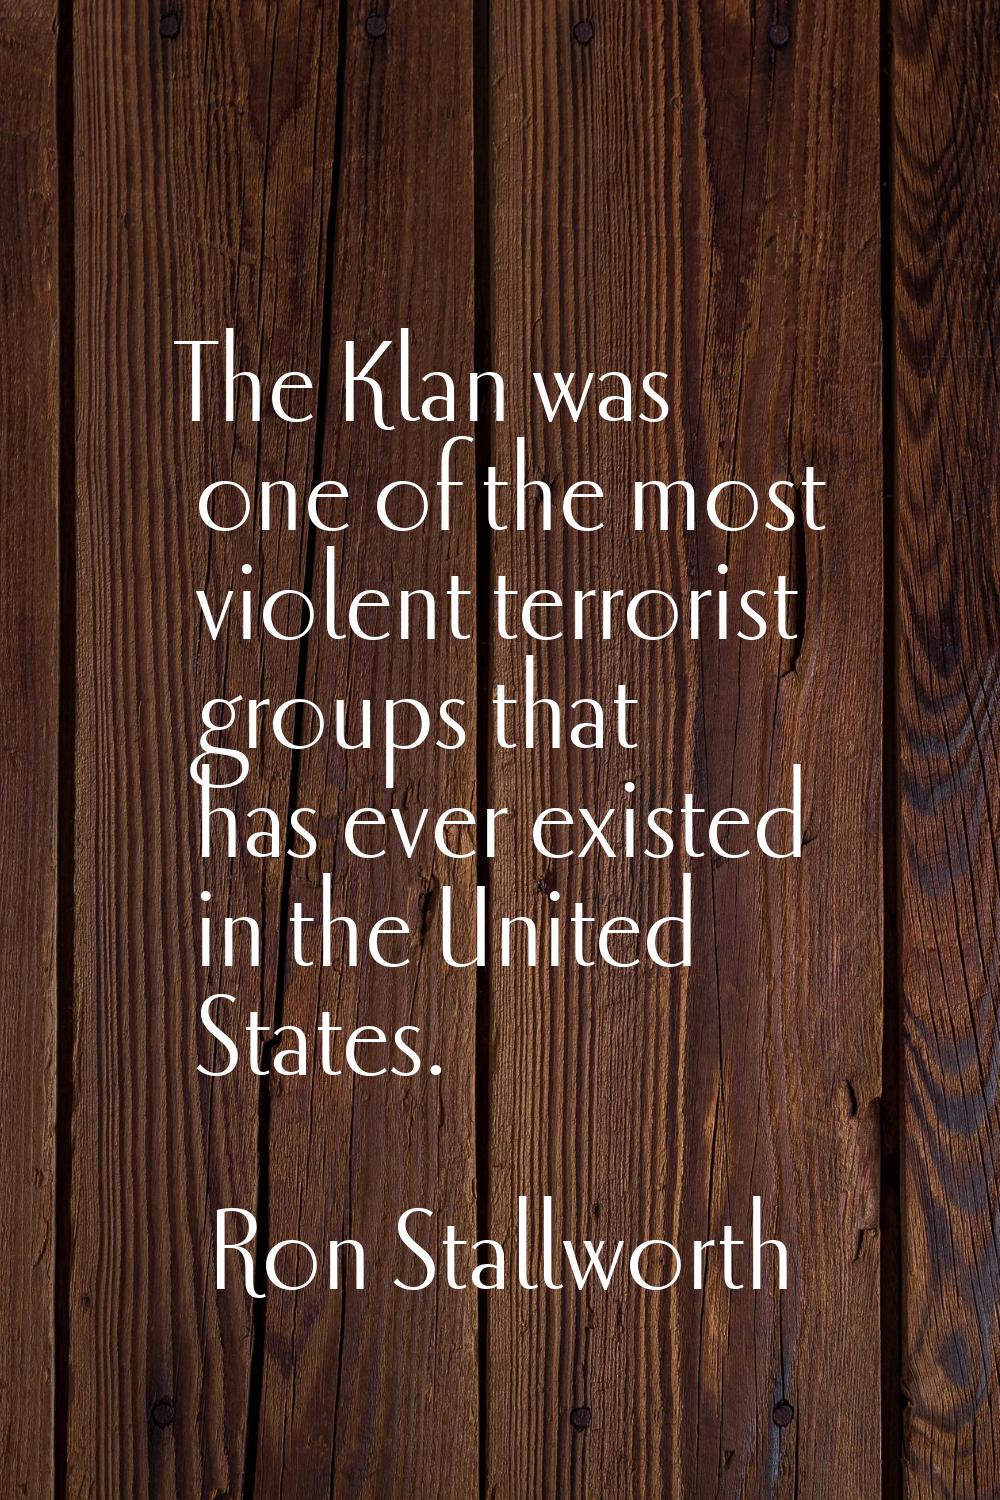 The Klan was one of the most violent terrorist groups that has ever existed in the United States.